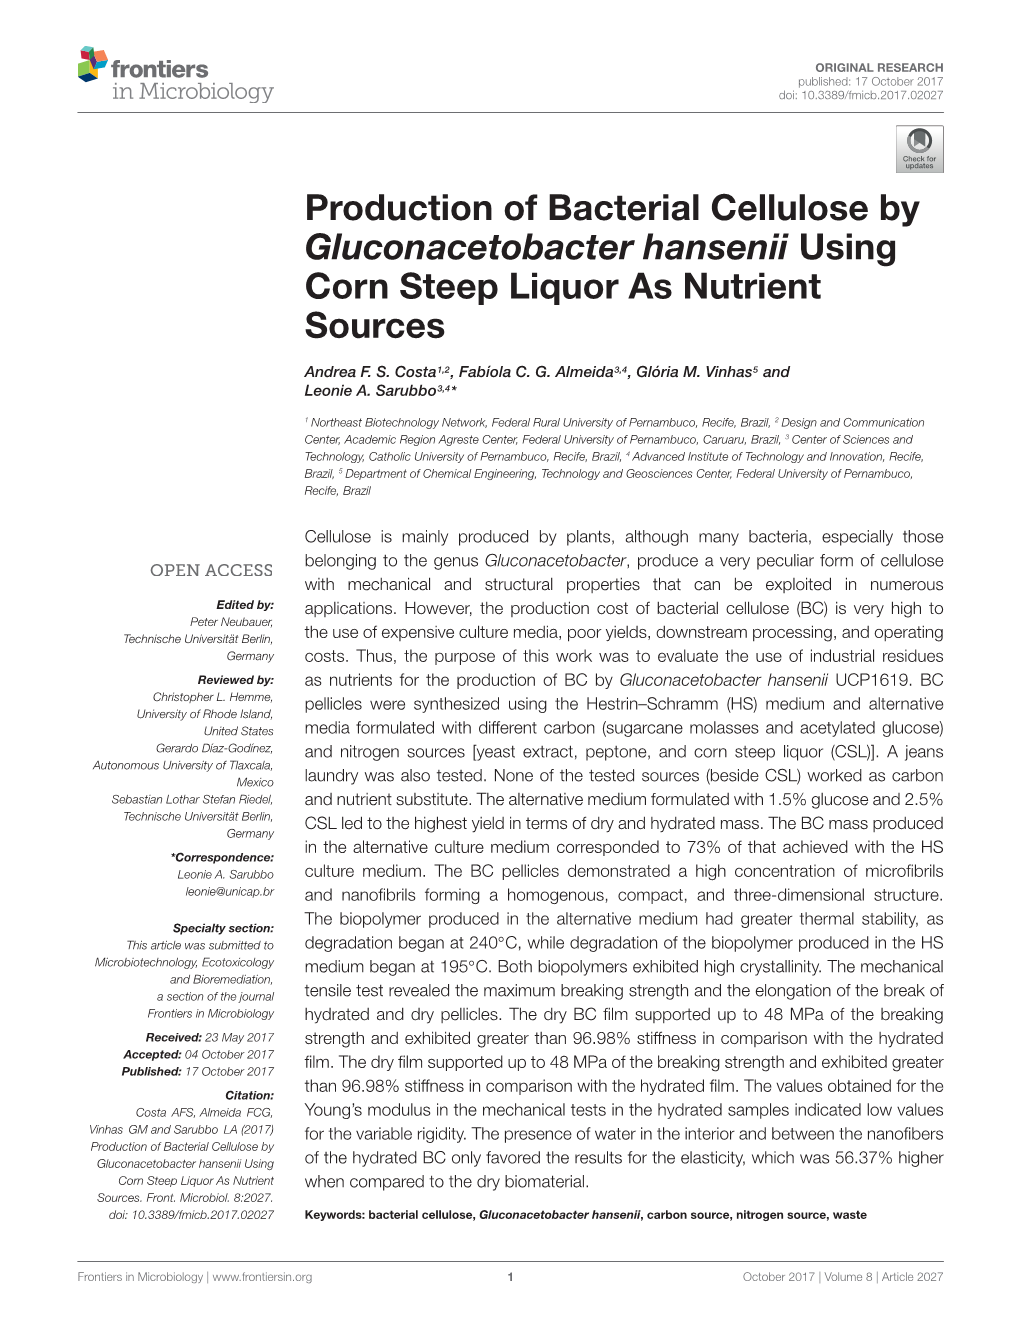 Production of Bacterial Cellulose by Gluconacetobacter Hansenii Using Corn Steep Liquor As Nutrient Sources